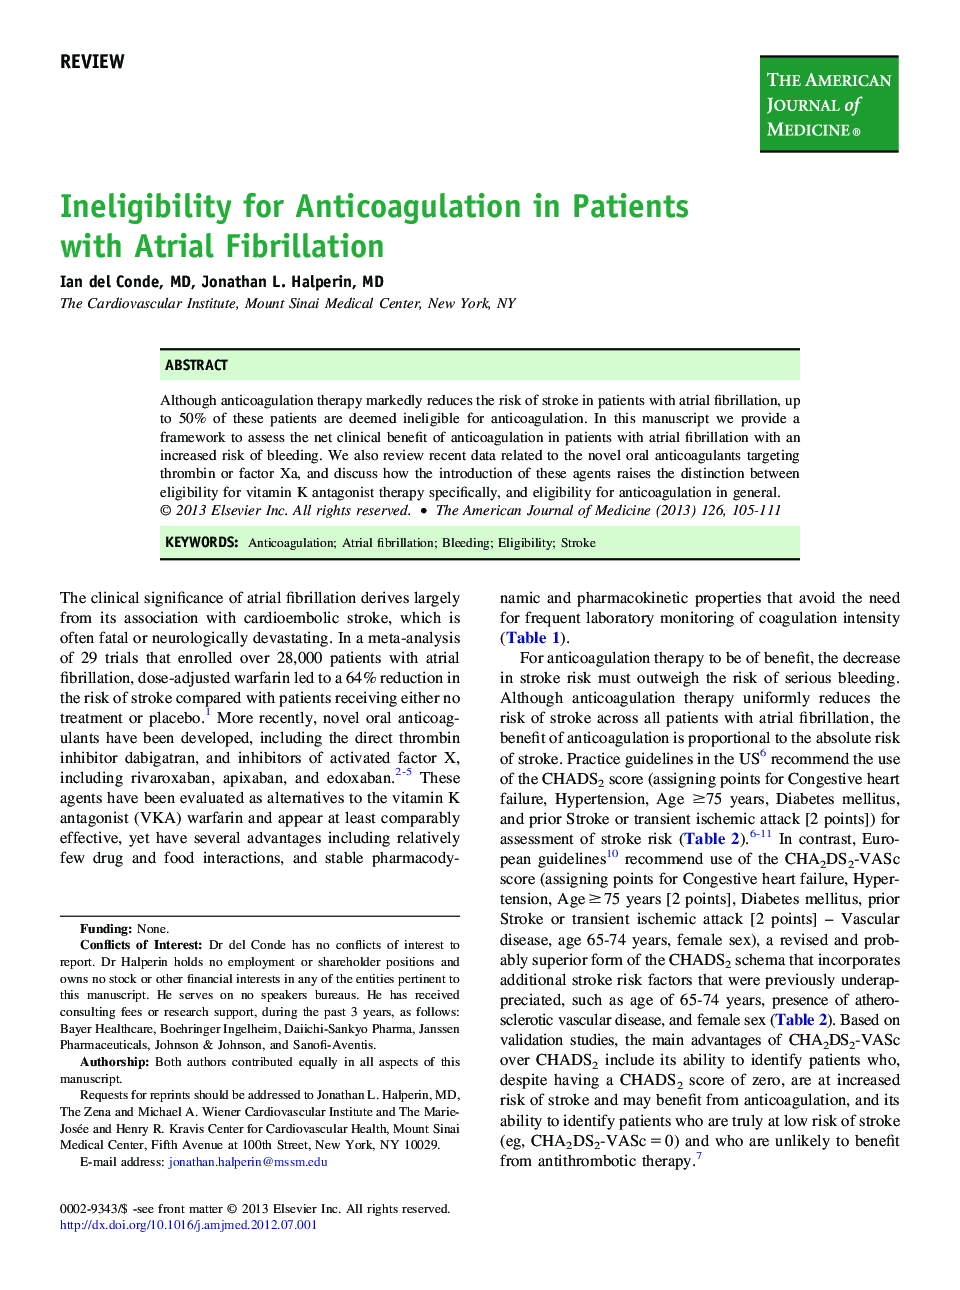 Ineligibility for Anticoagulation in Patients with Atrial Fibrillation 